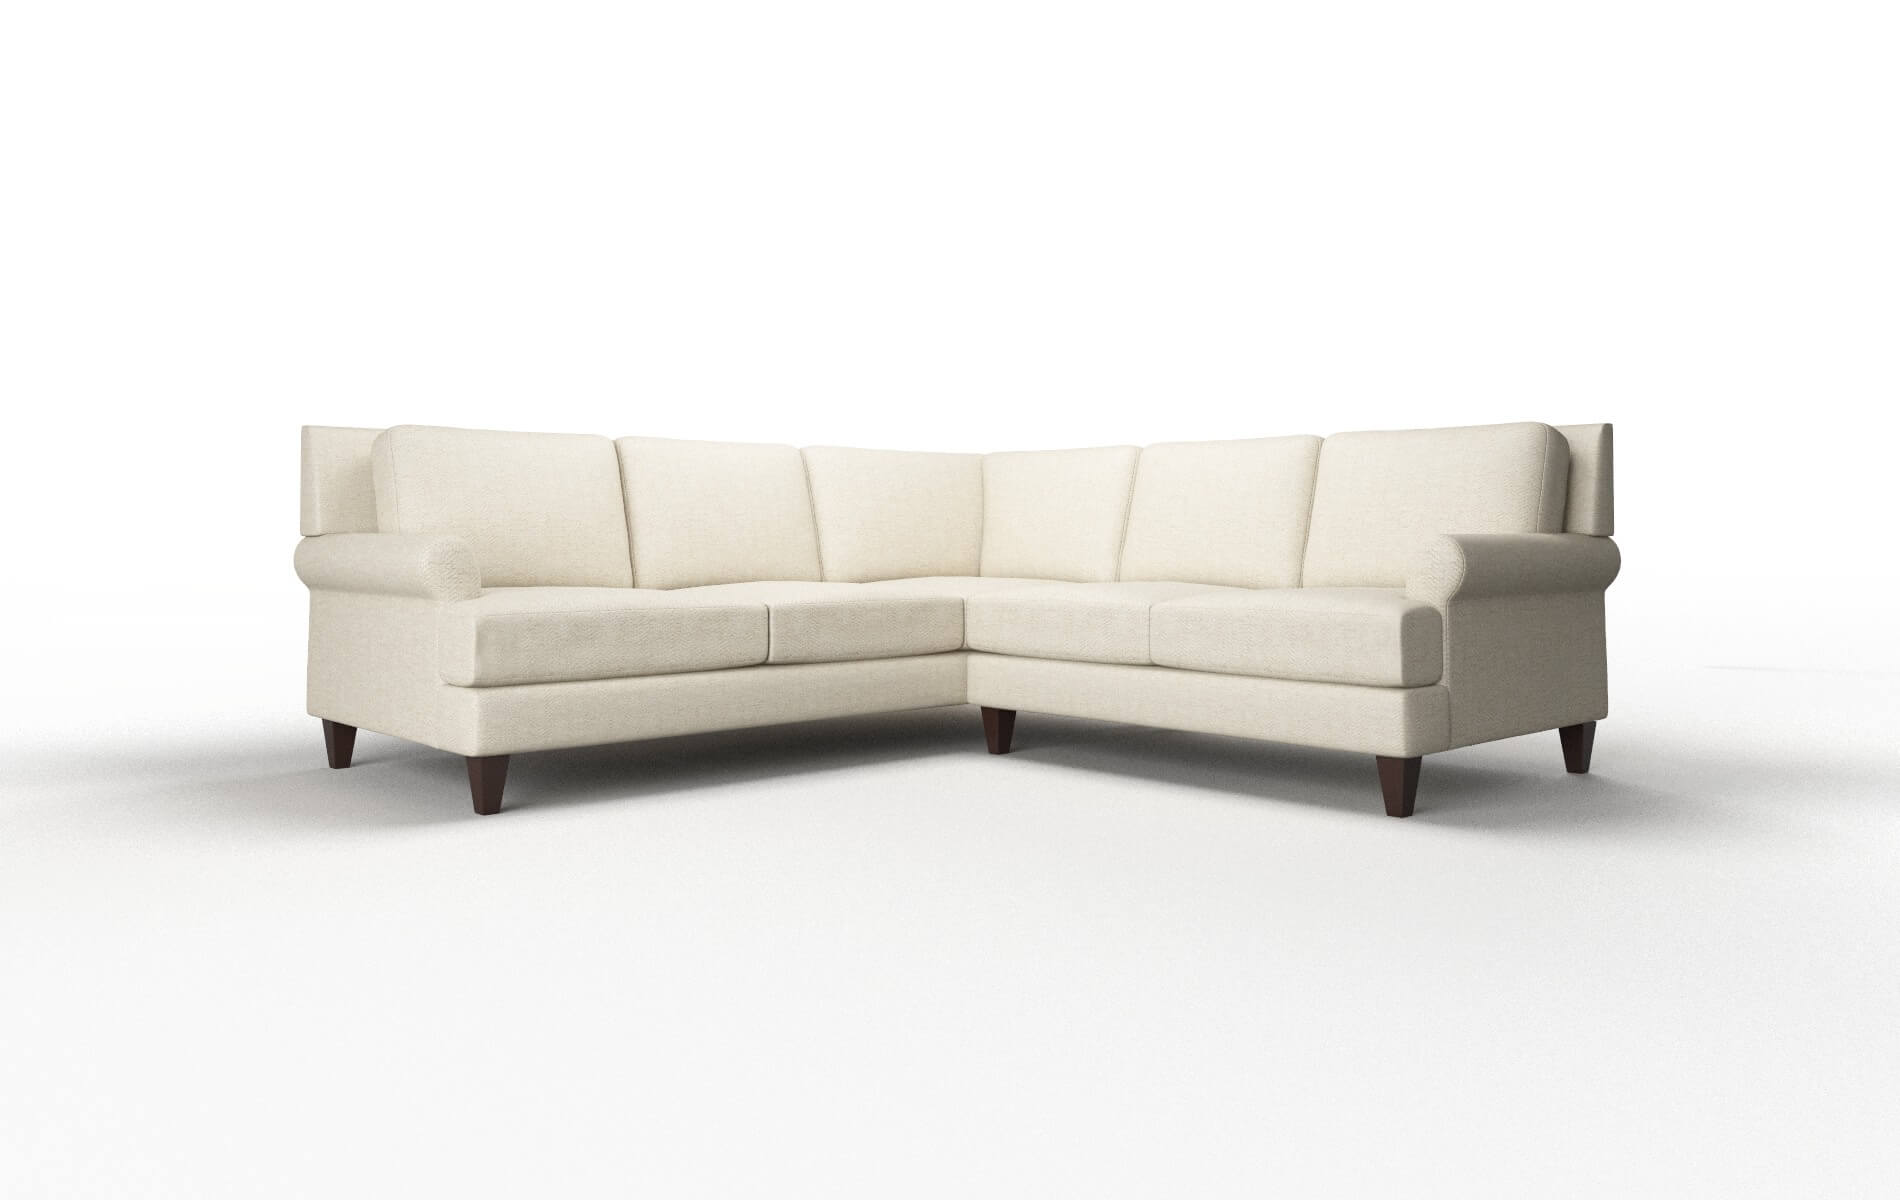 Stockholm Catalina Wheat Sectional espresso legs